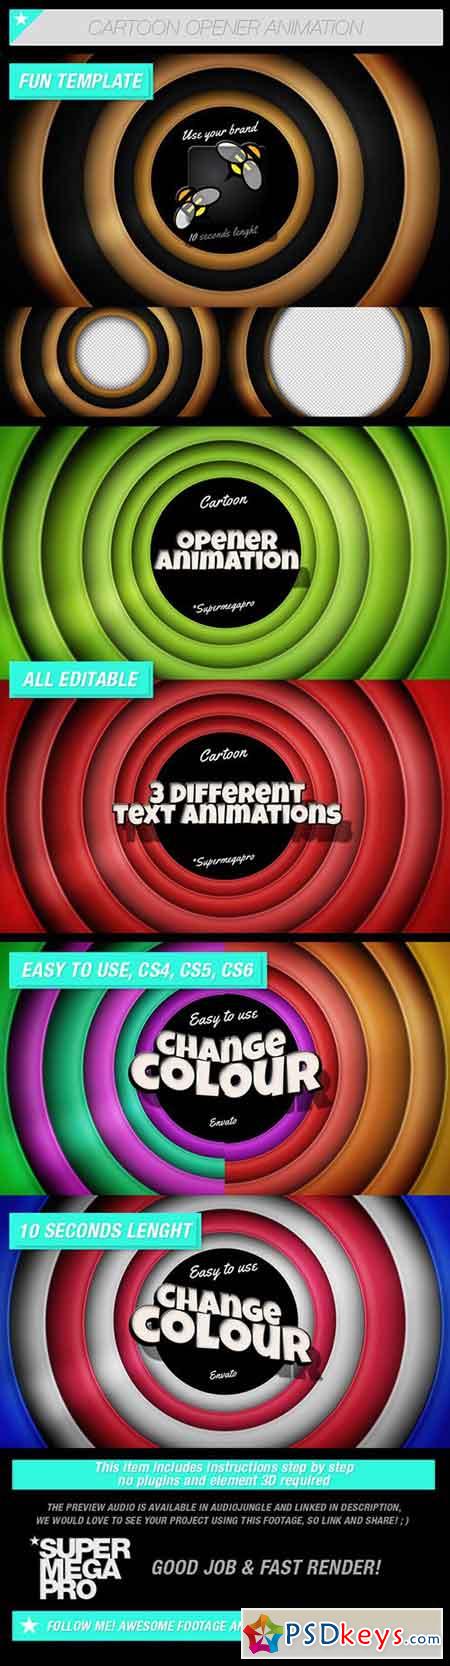 Animation » page 7 » Free Download Photoshop Vector Stock image Via Torrent  Zippyshare From 